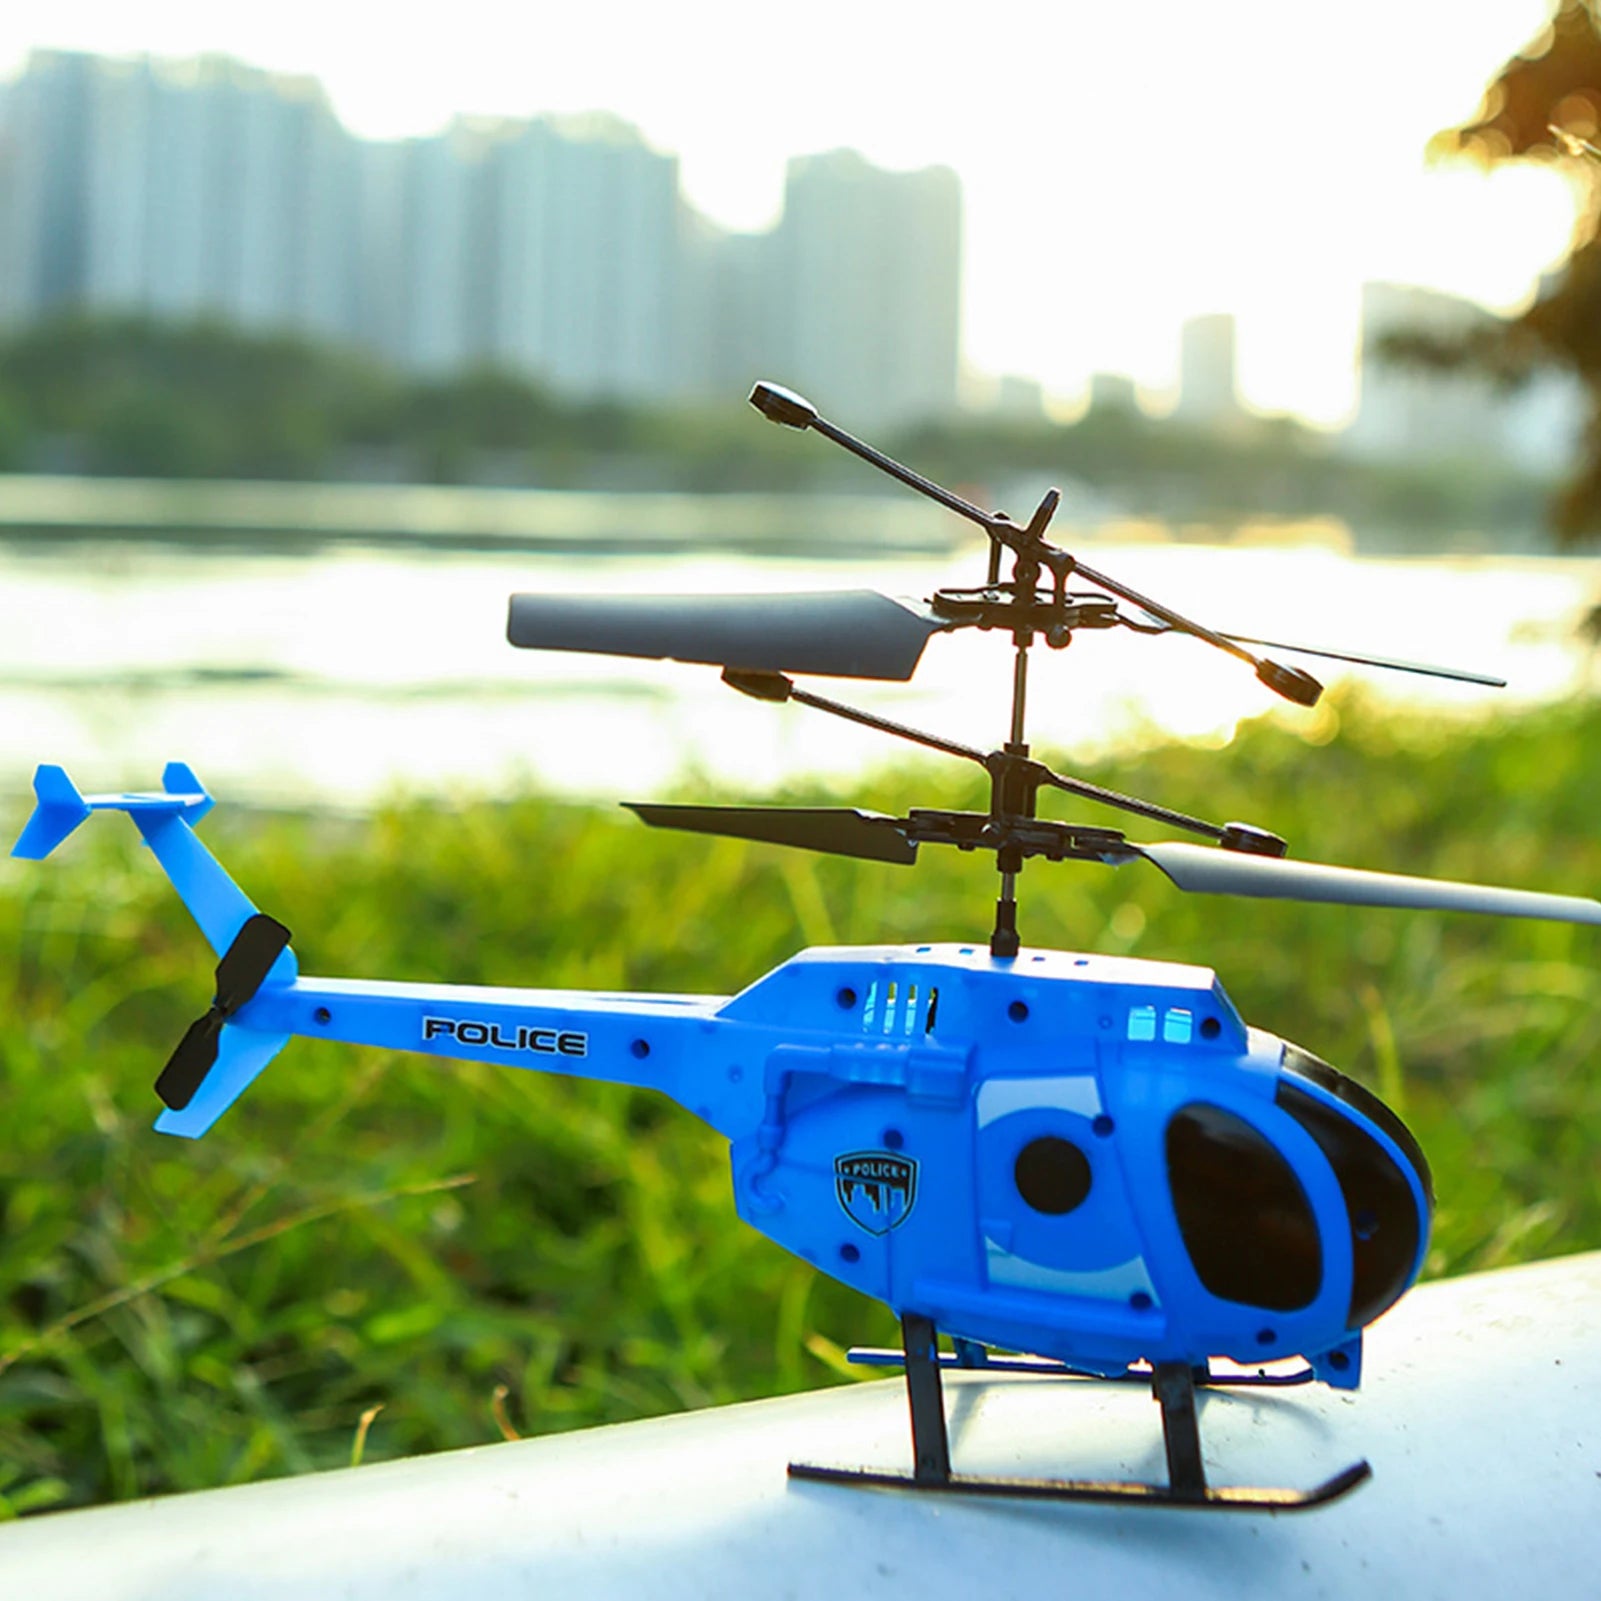 C135 RC Helicopter, Package Included: 1 X Quadcopter Toy 1 x Remote Control 1 